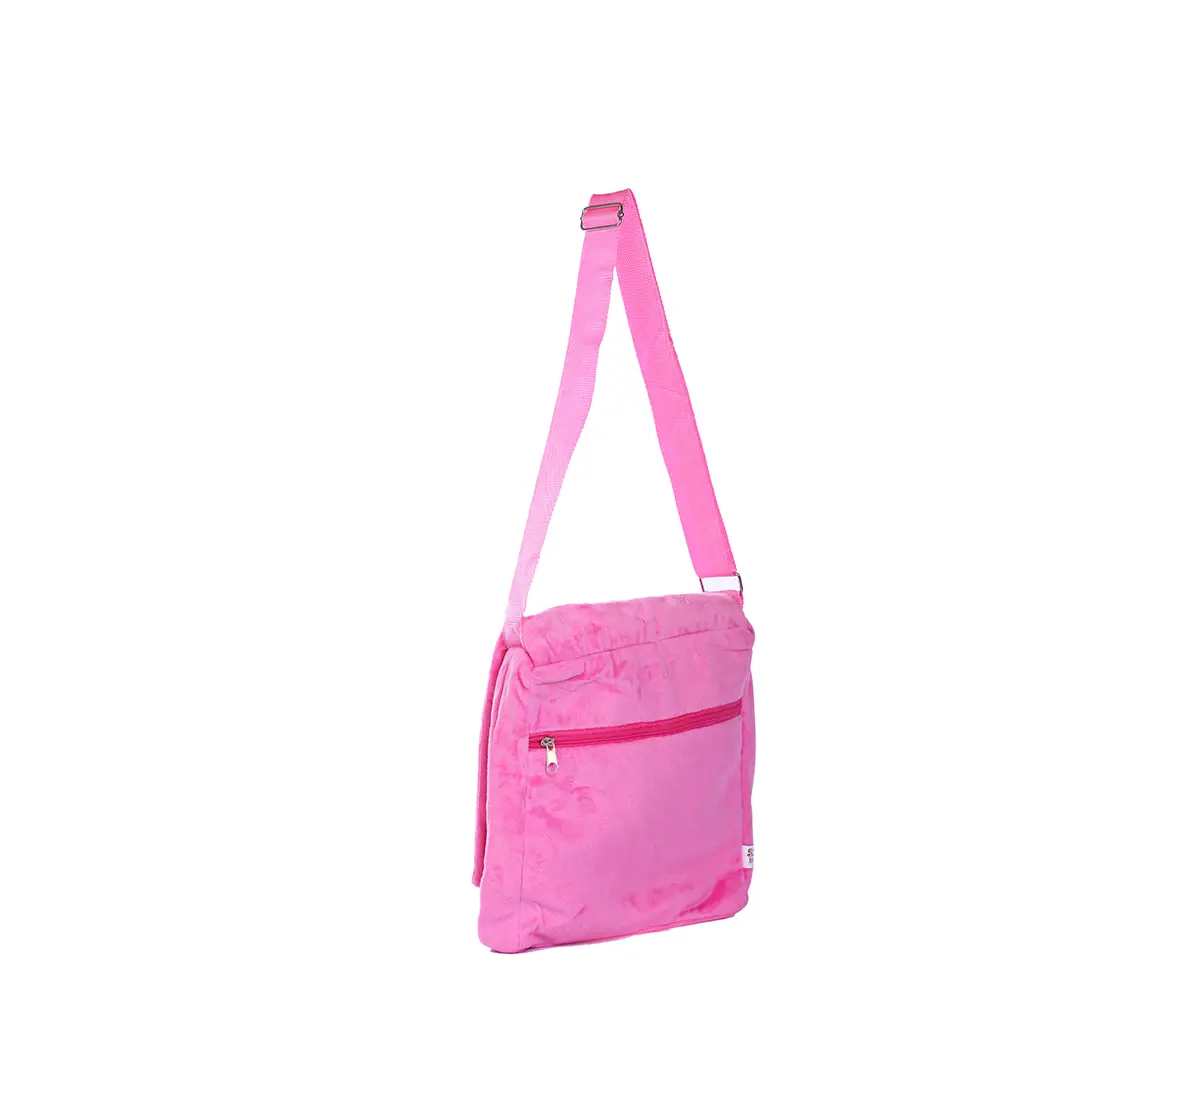 Barbie Soft Buddies Polyester Sling Bag (Pink) Plush Accessories for Kids age 12M+ - 25.4 Cm 